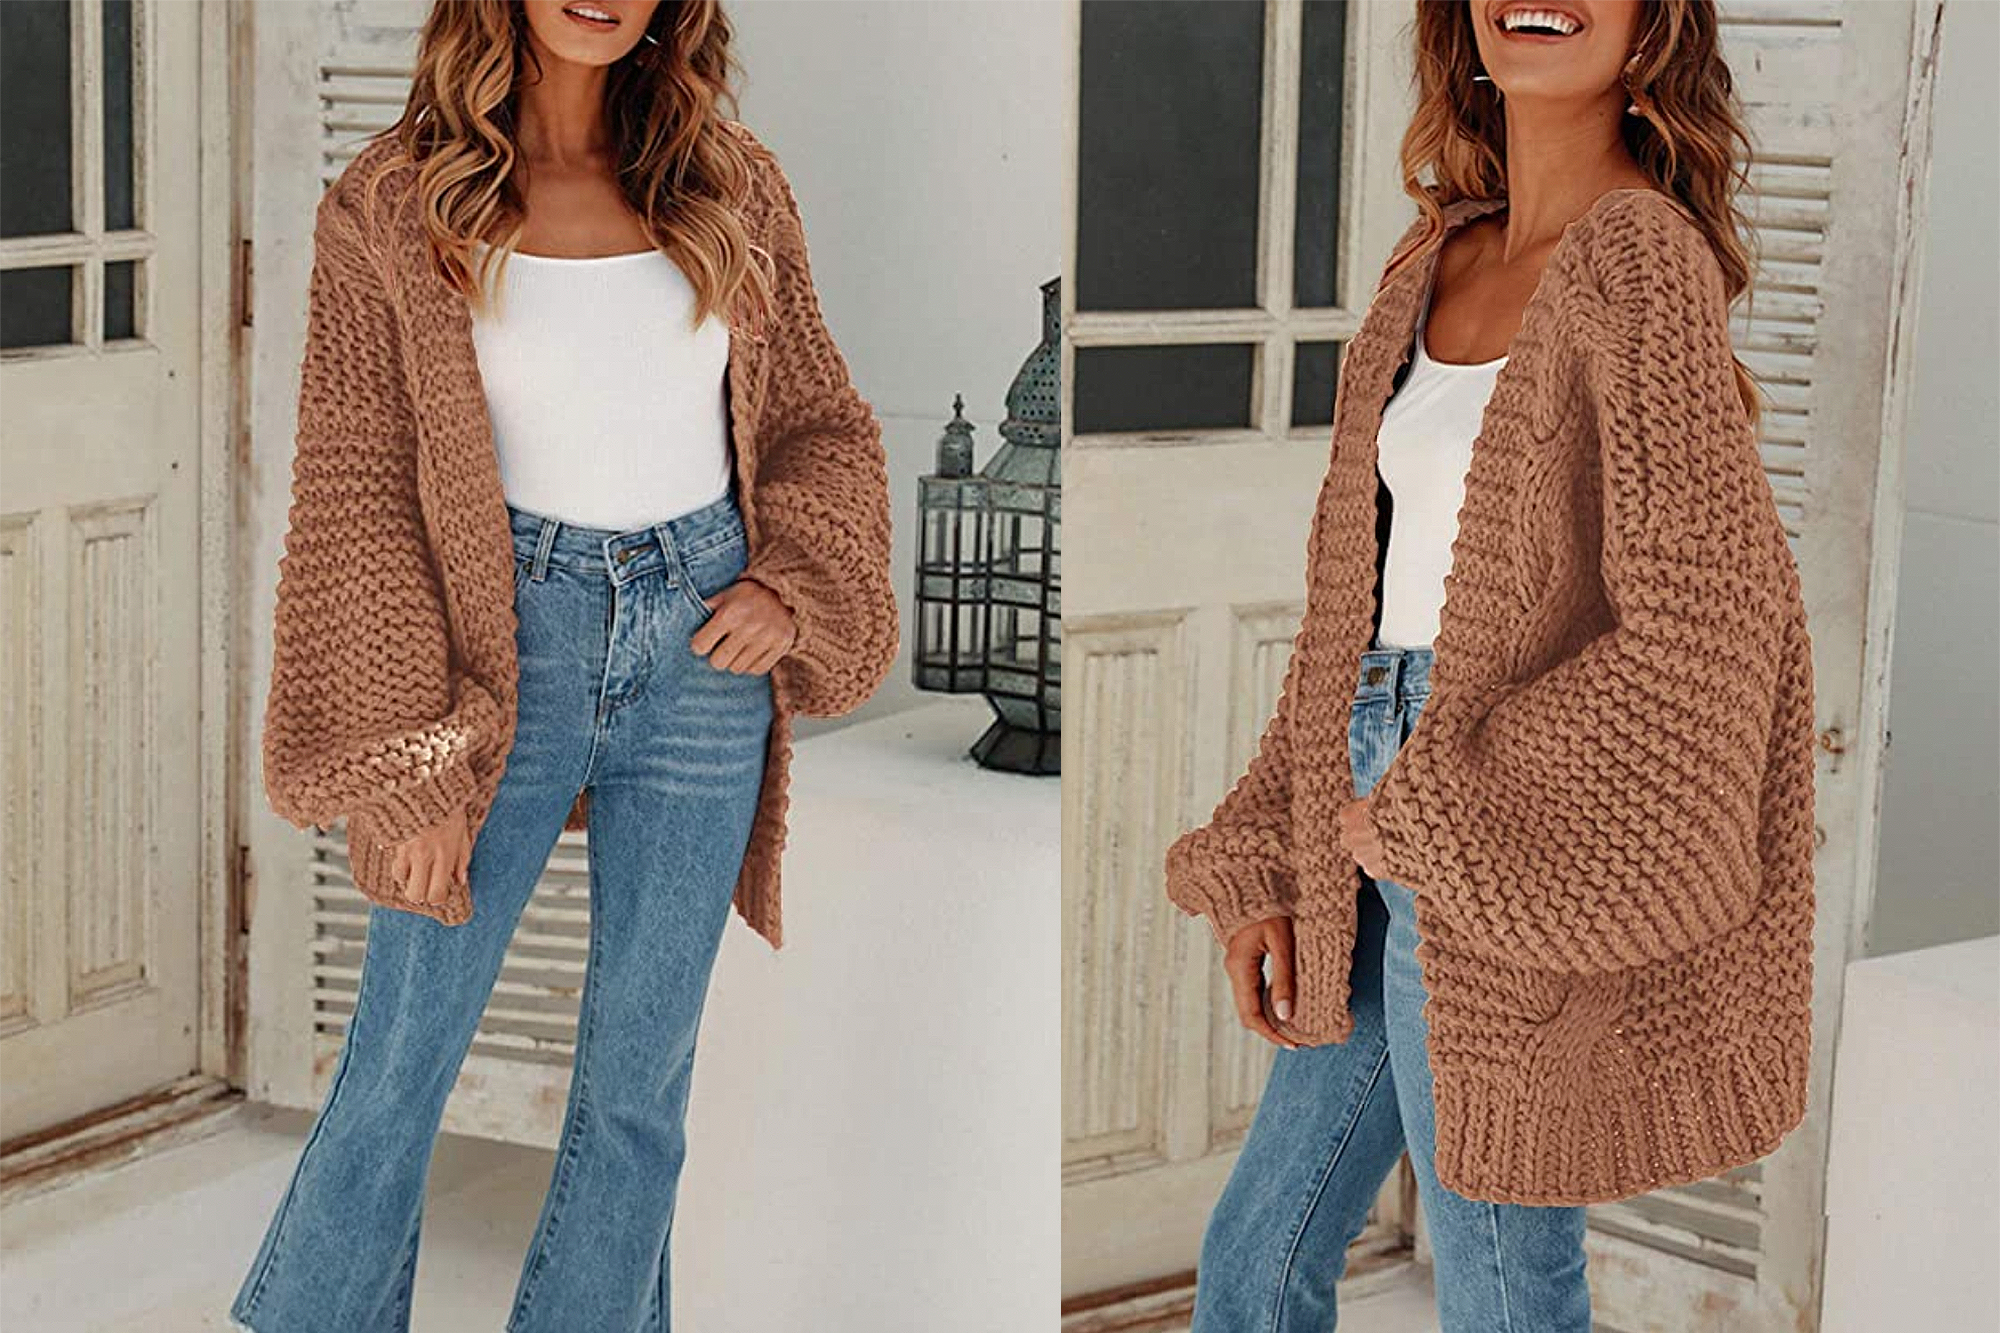 https://www.usmagazine.com/wp-content/uploads/2021/09/MEROKEETY-Womens-Open-Front-Oversized-Chunky-Cable-Knit-Sweater.jpg?quality=70&strip=all